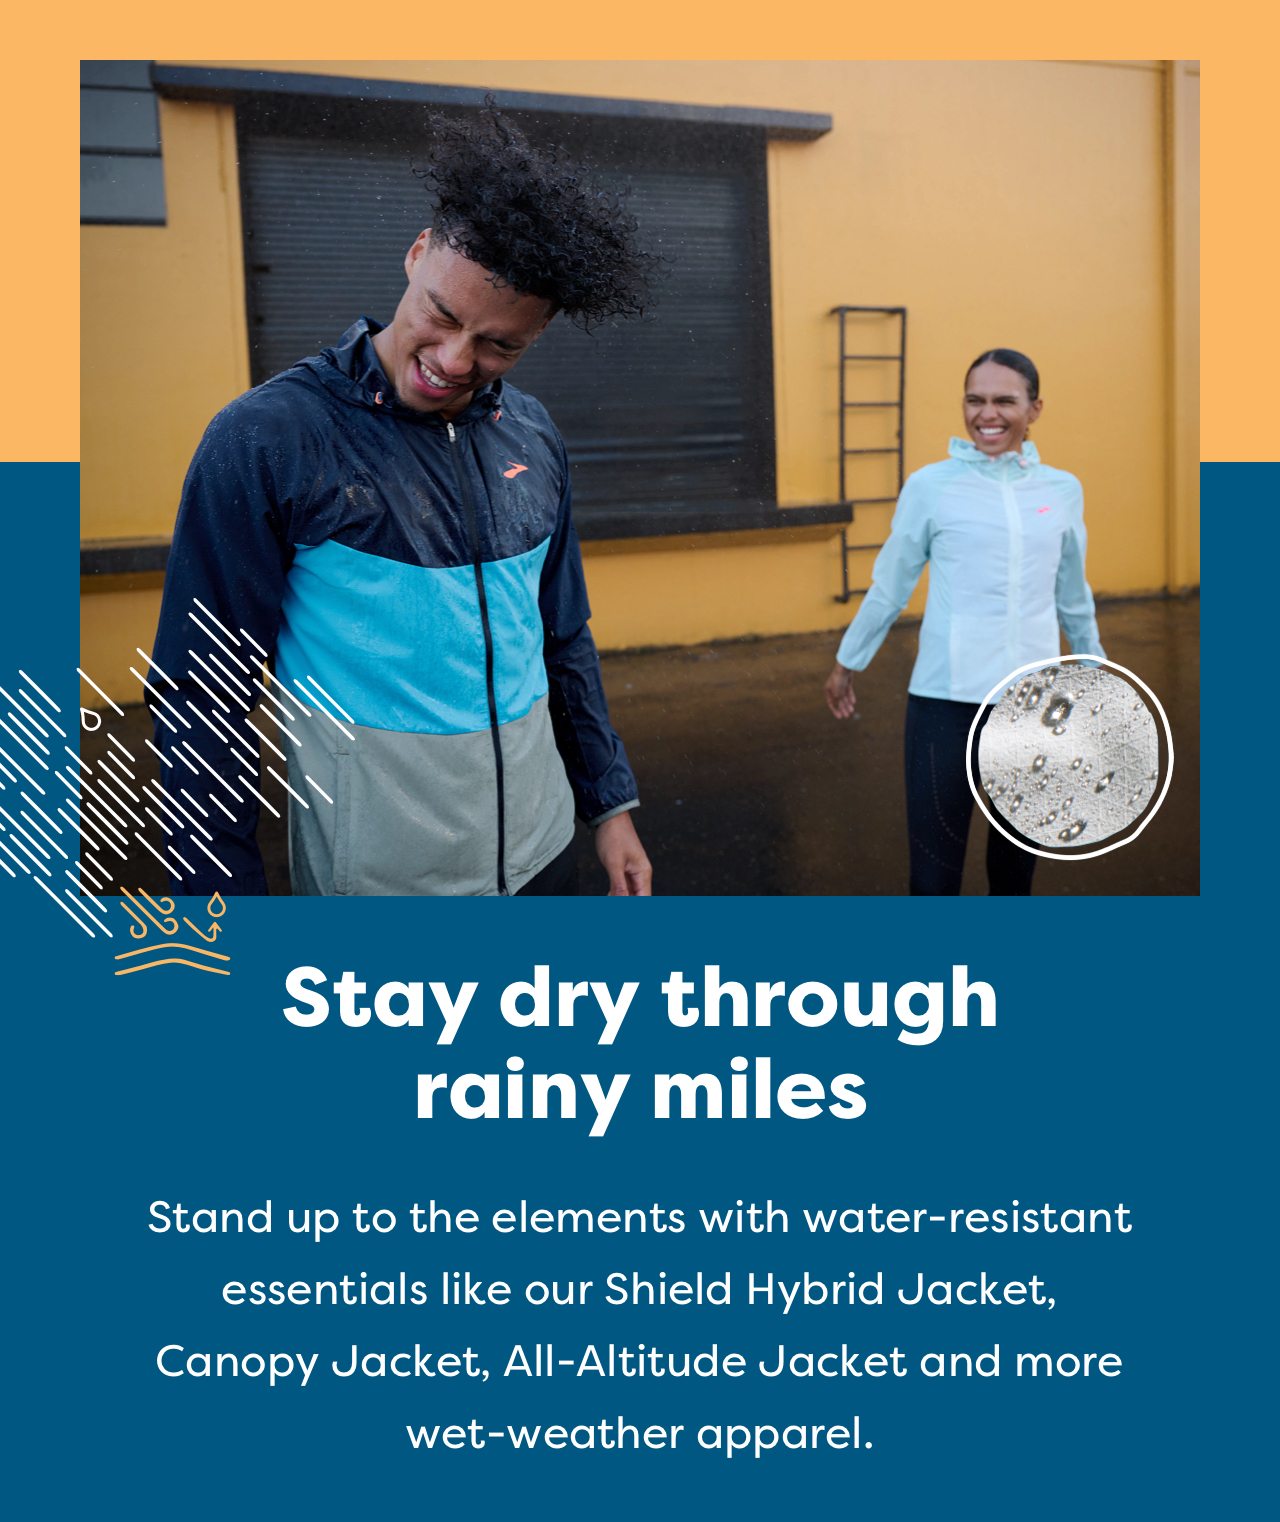 Stay dry through rainy miles | Stand up to the elements with water-resistant essentials like our Shield Hybrid Jacket, Canopy Jacket, All-Altitude Jacket and more wet-weather apparel.